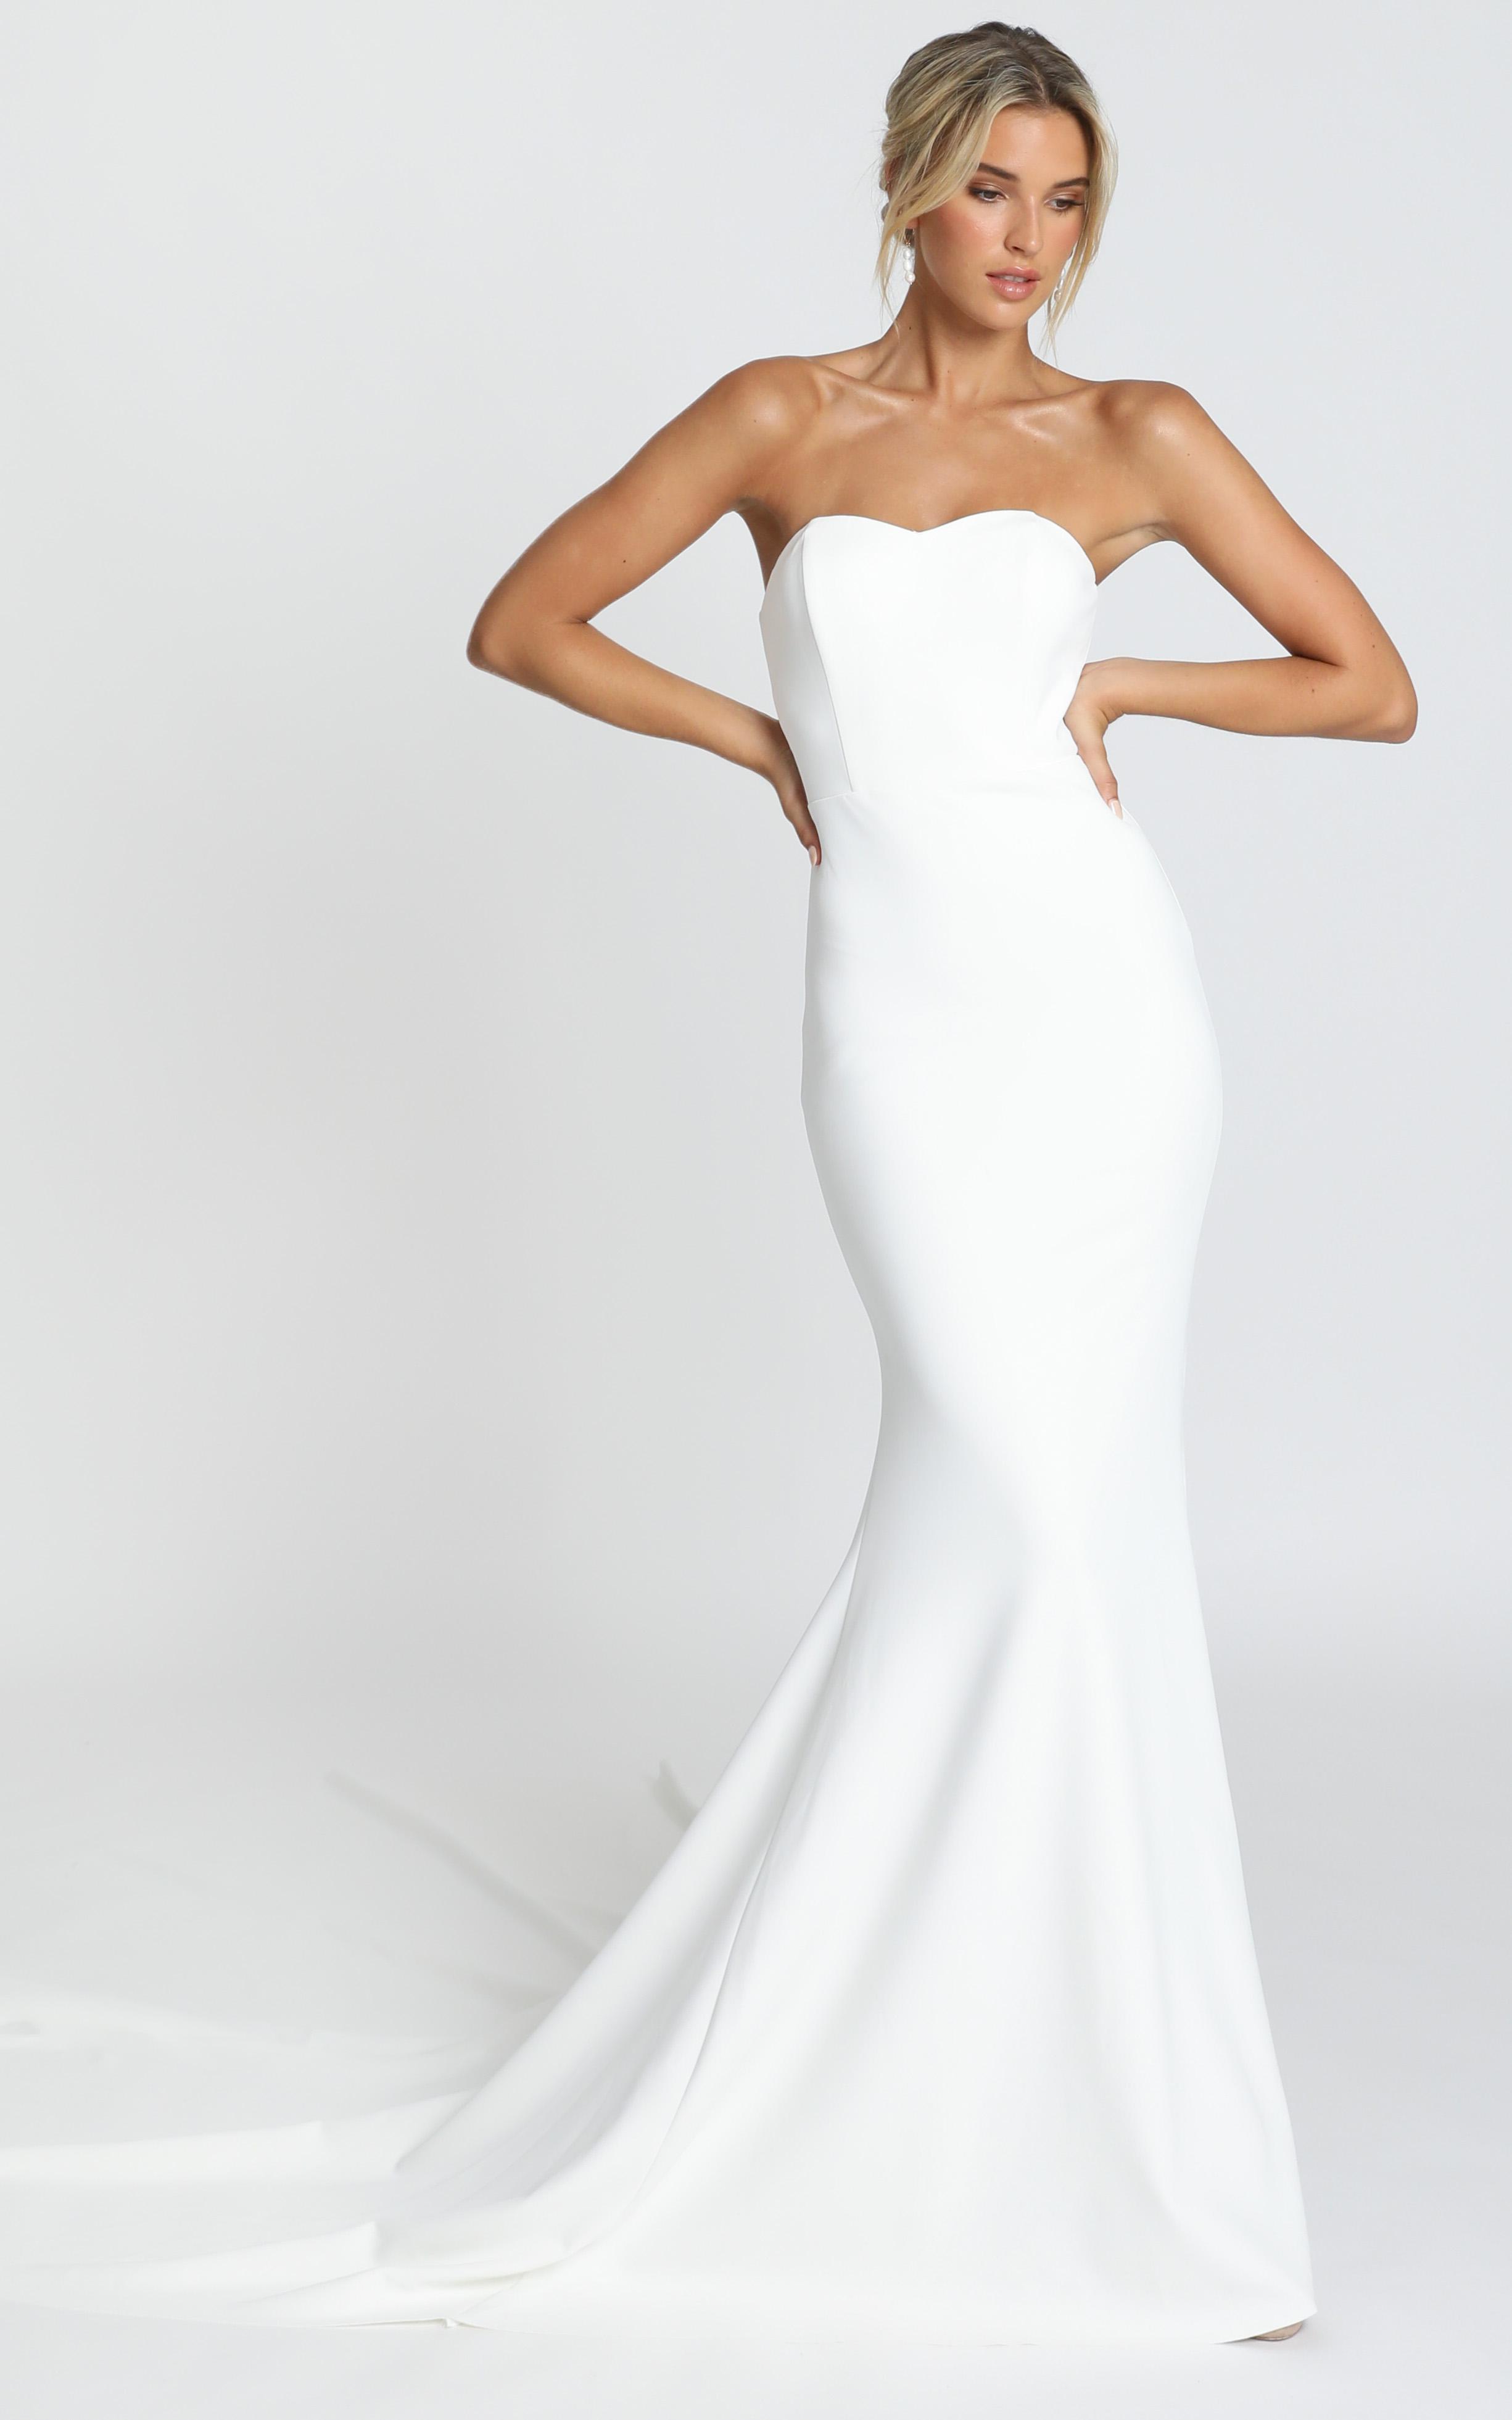 Vows For Life Gown in White - 04, WHT1, hi-res image number null